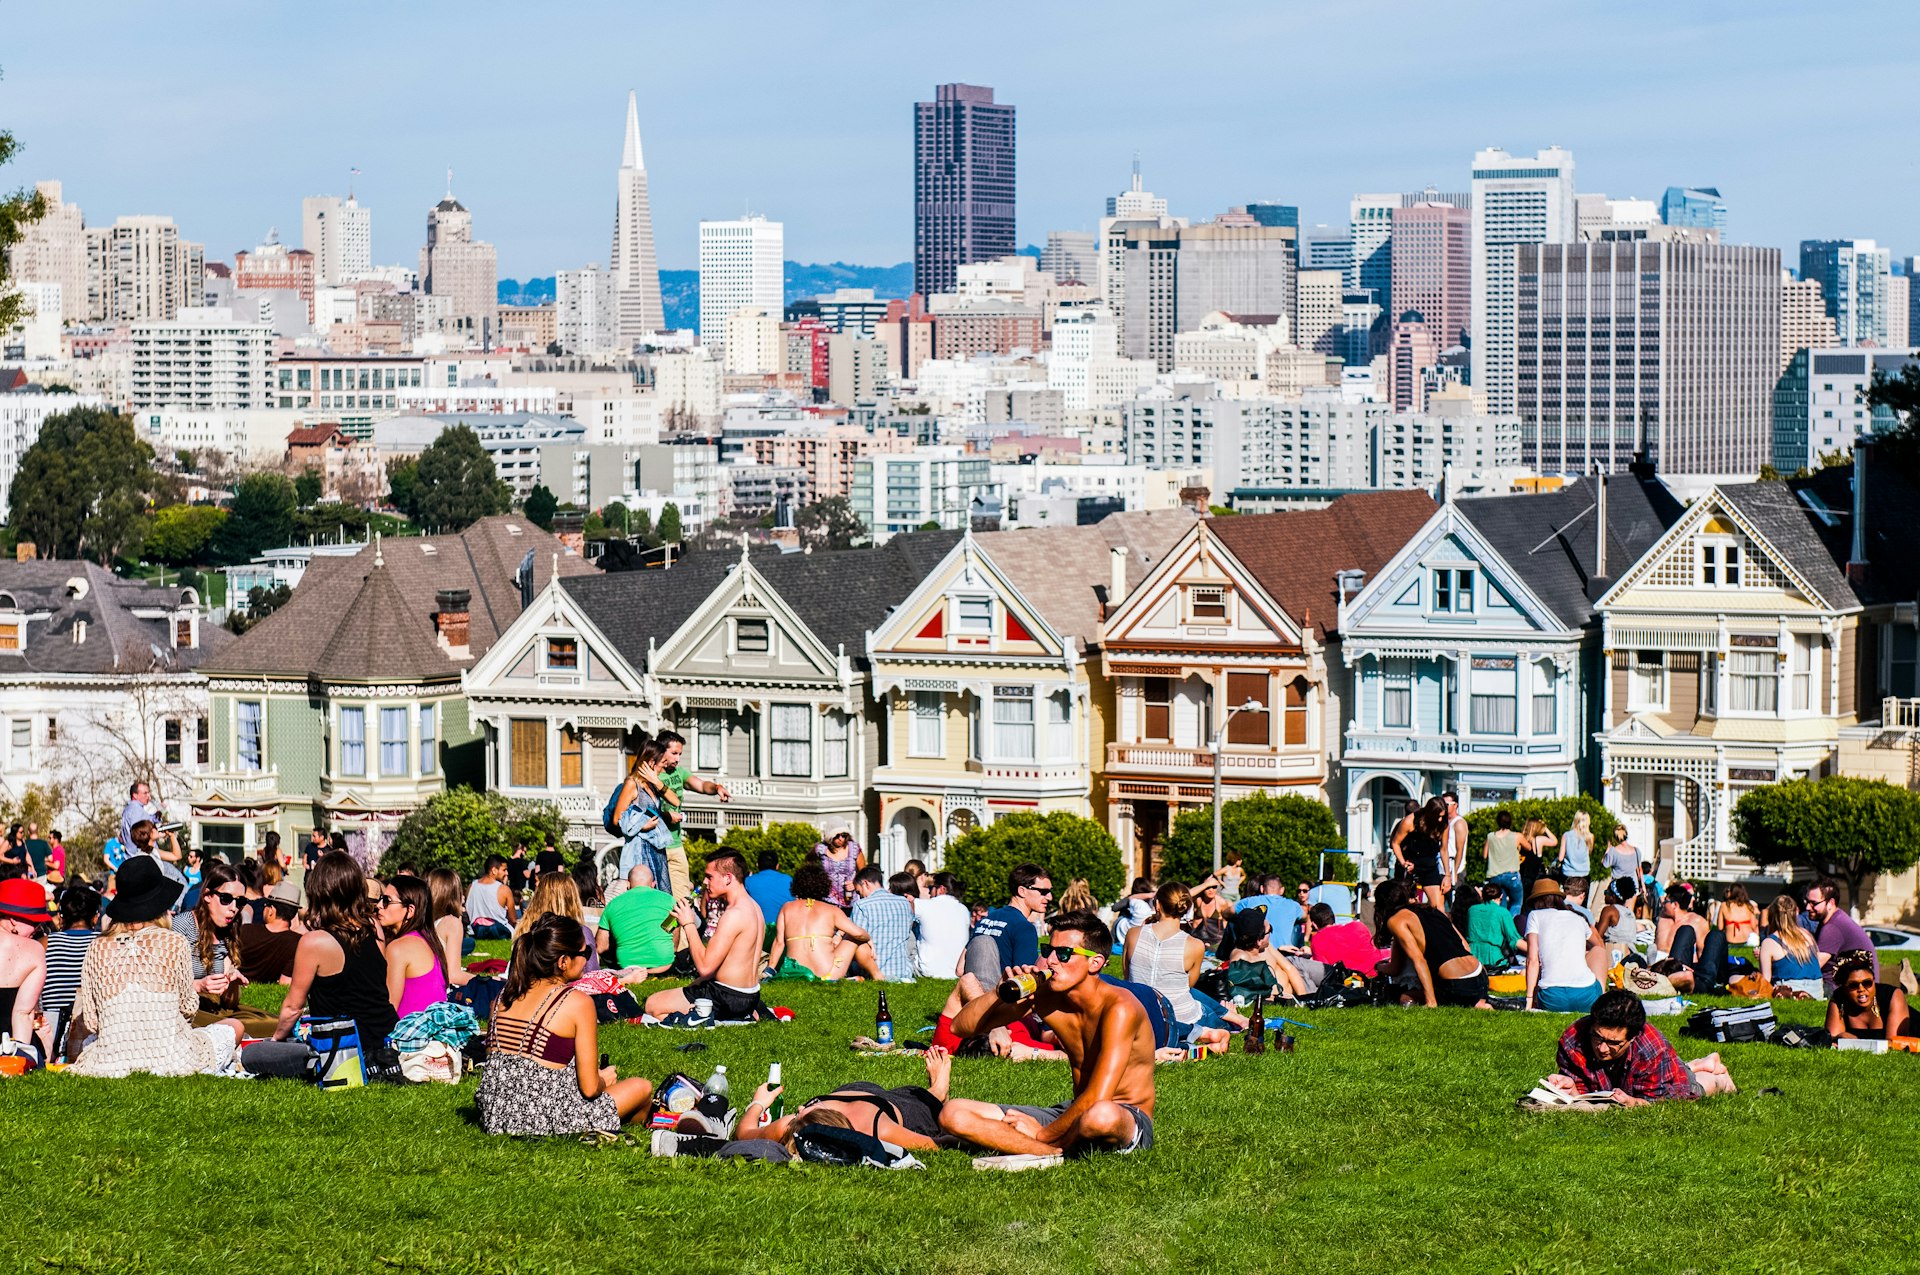 People sit on the grass at Alamo Square Park in San Francisco, next to a series of houses painted in bright colors called the Painted Ladies.